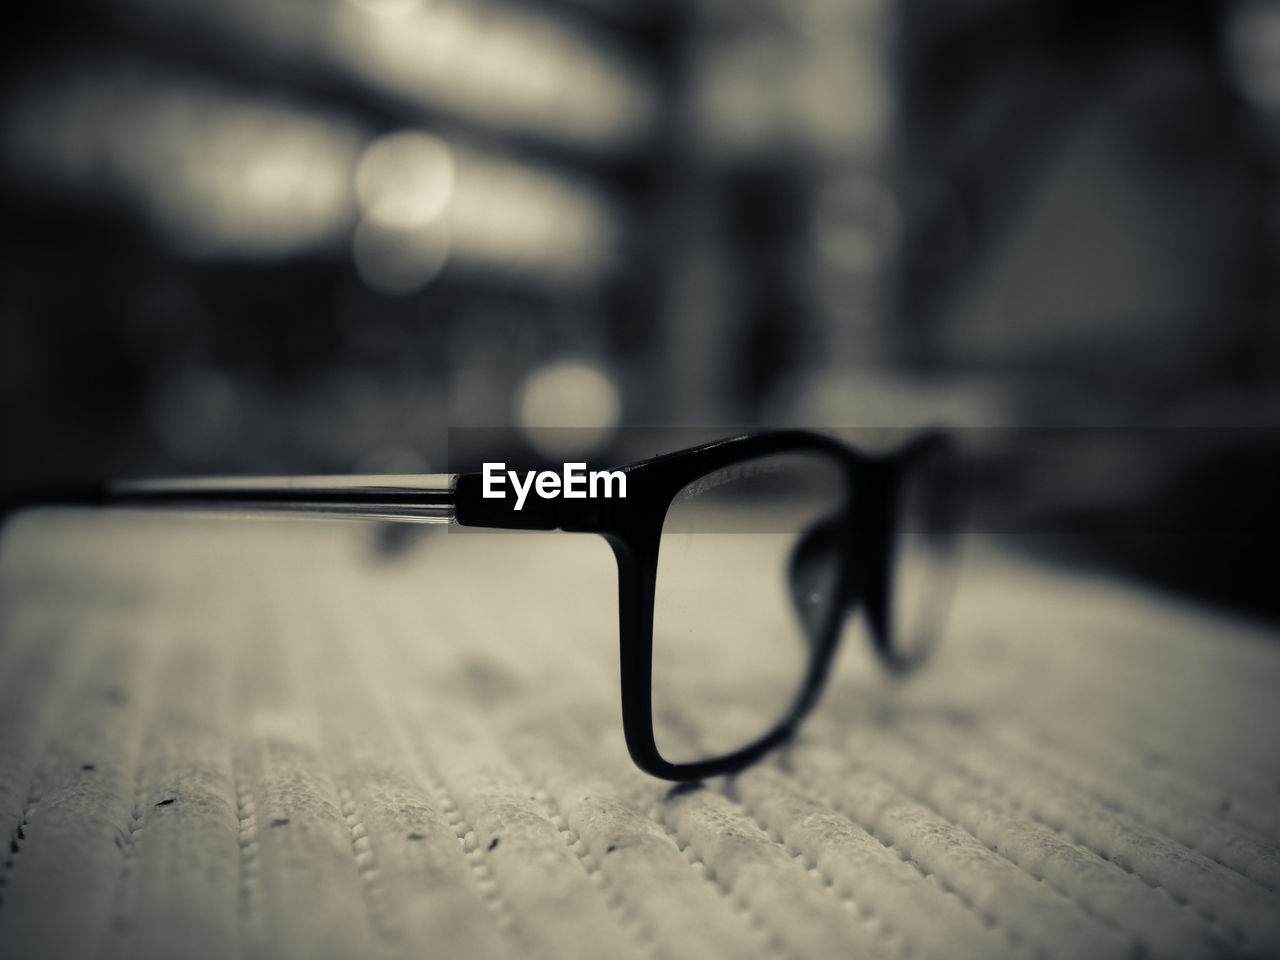 CLOSE-UP OF EYEGLASSES ON TABLE